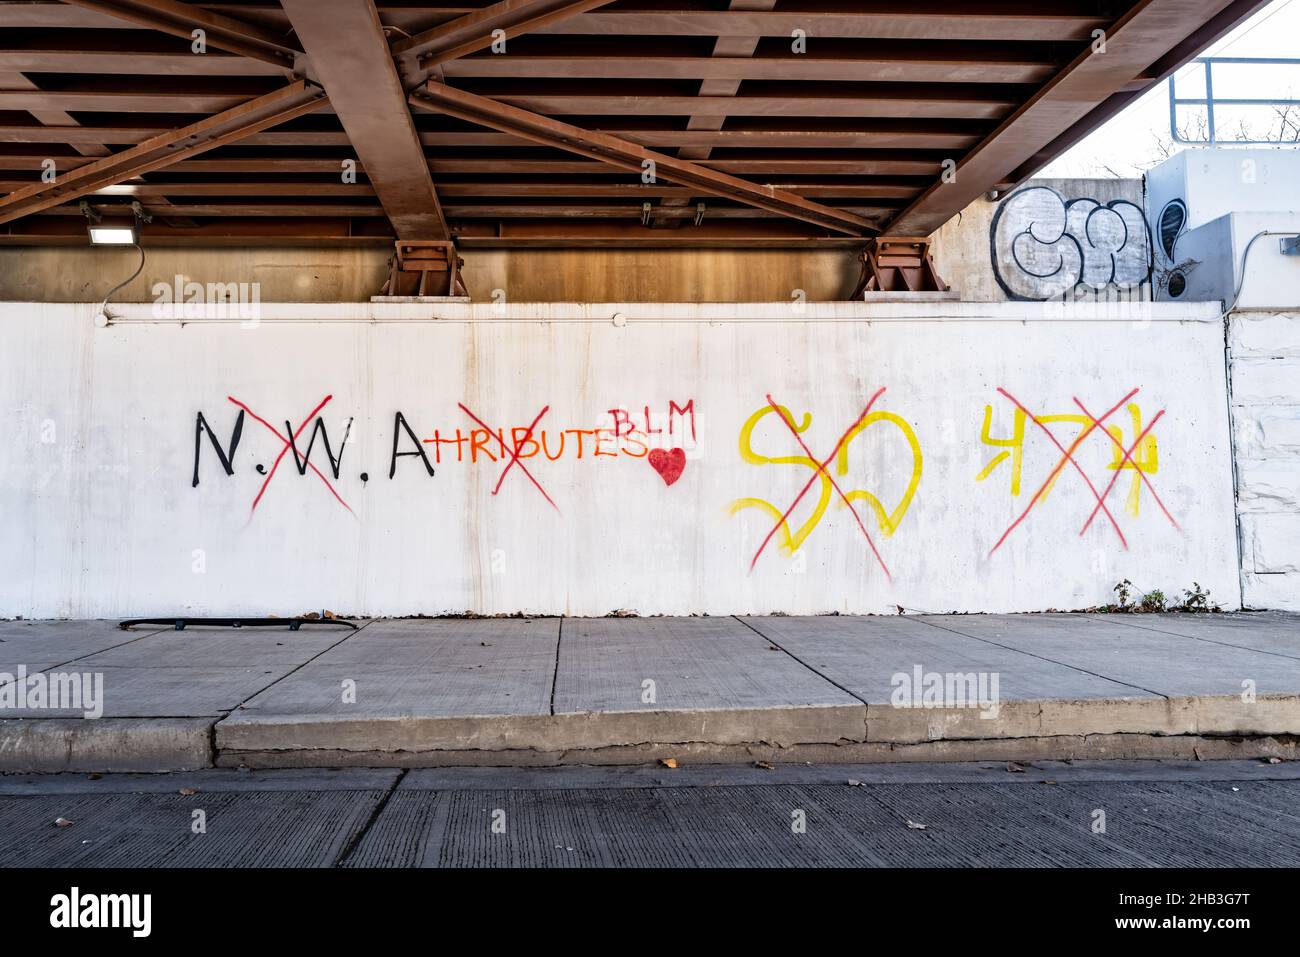 White wall with various graffiti where the original graffiti of NWA and some graffiti tags has been crossed out and BLM with a heart has been written in instead. Stock Photo